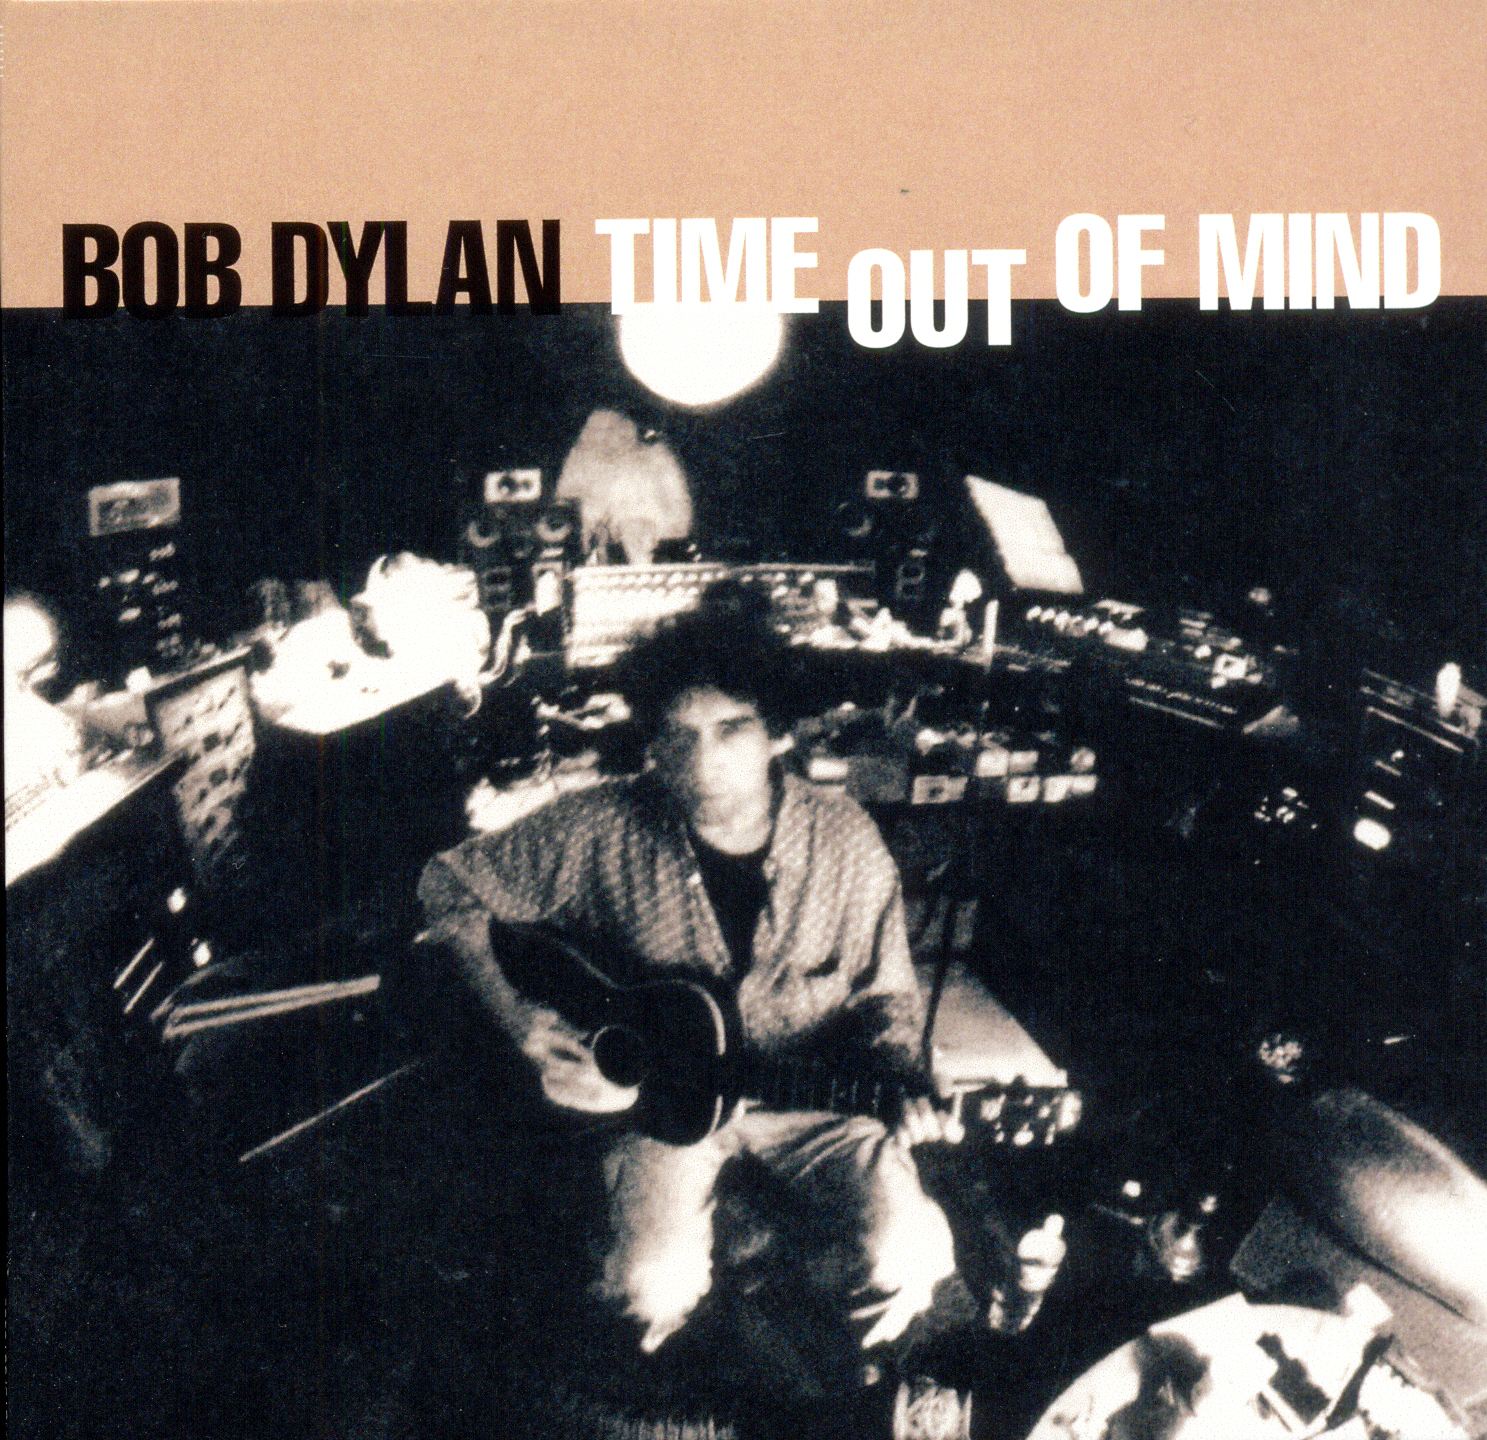 Bob Dylan - Time Out Of Mind (1997) 24bit FLAC Download